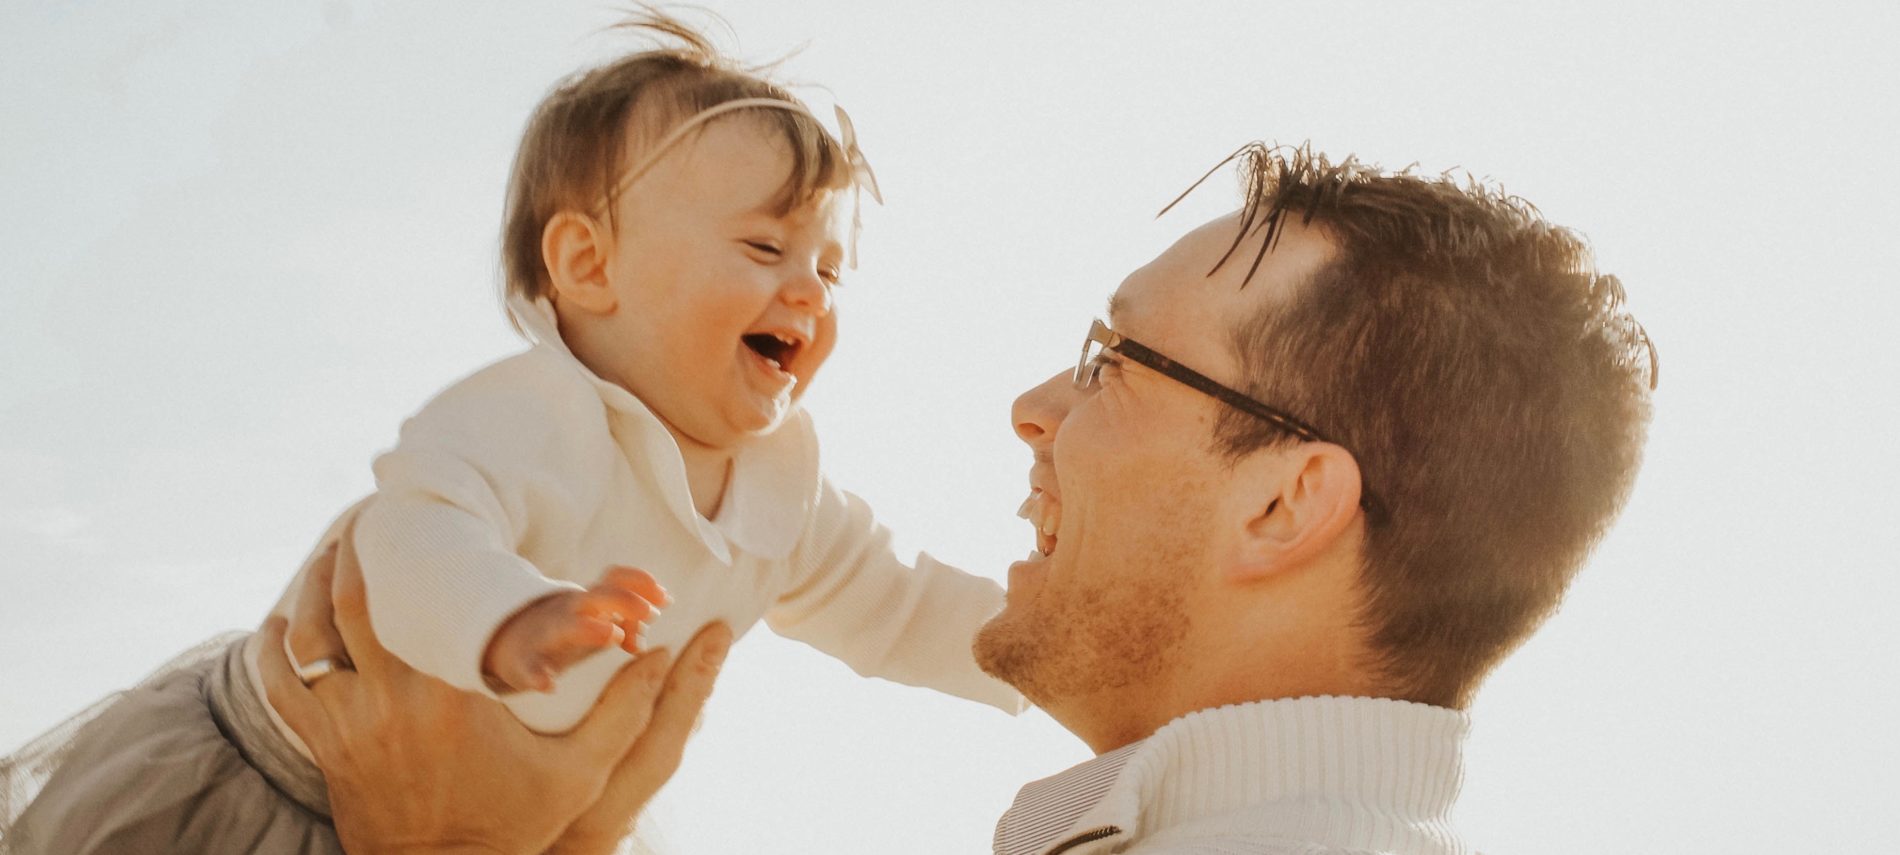 Dad raising little daughter over his head as she laughs with delight.